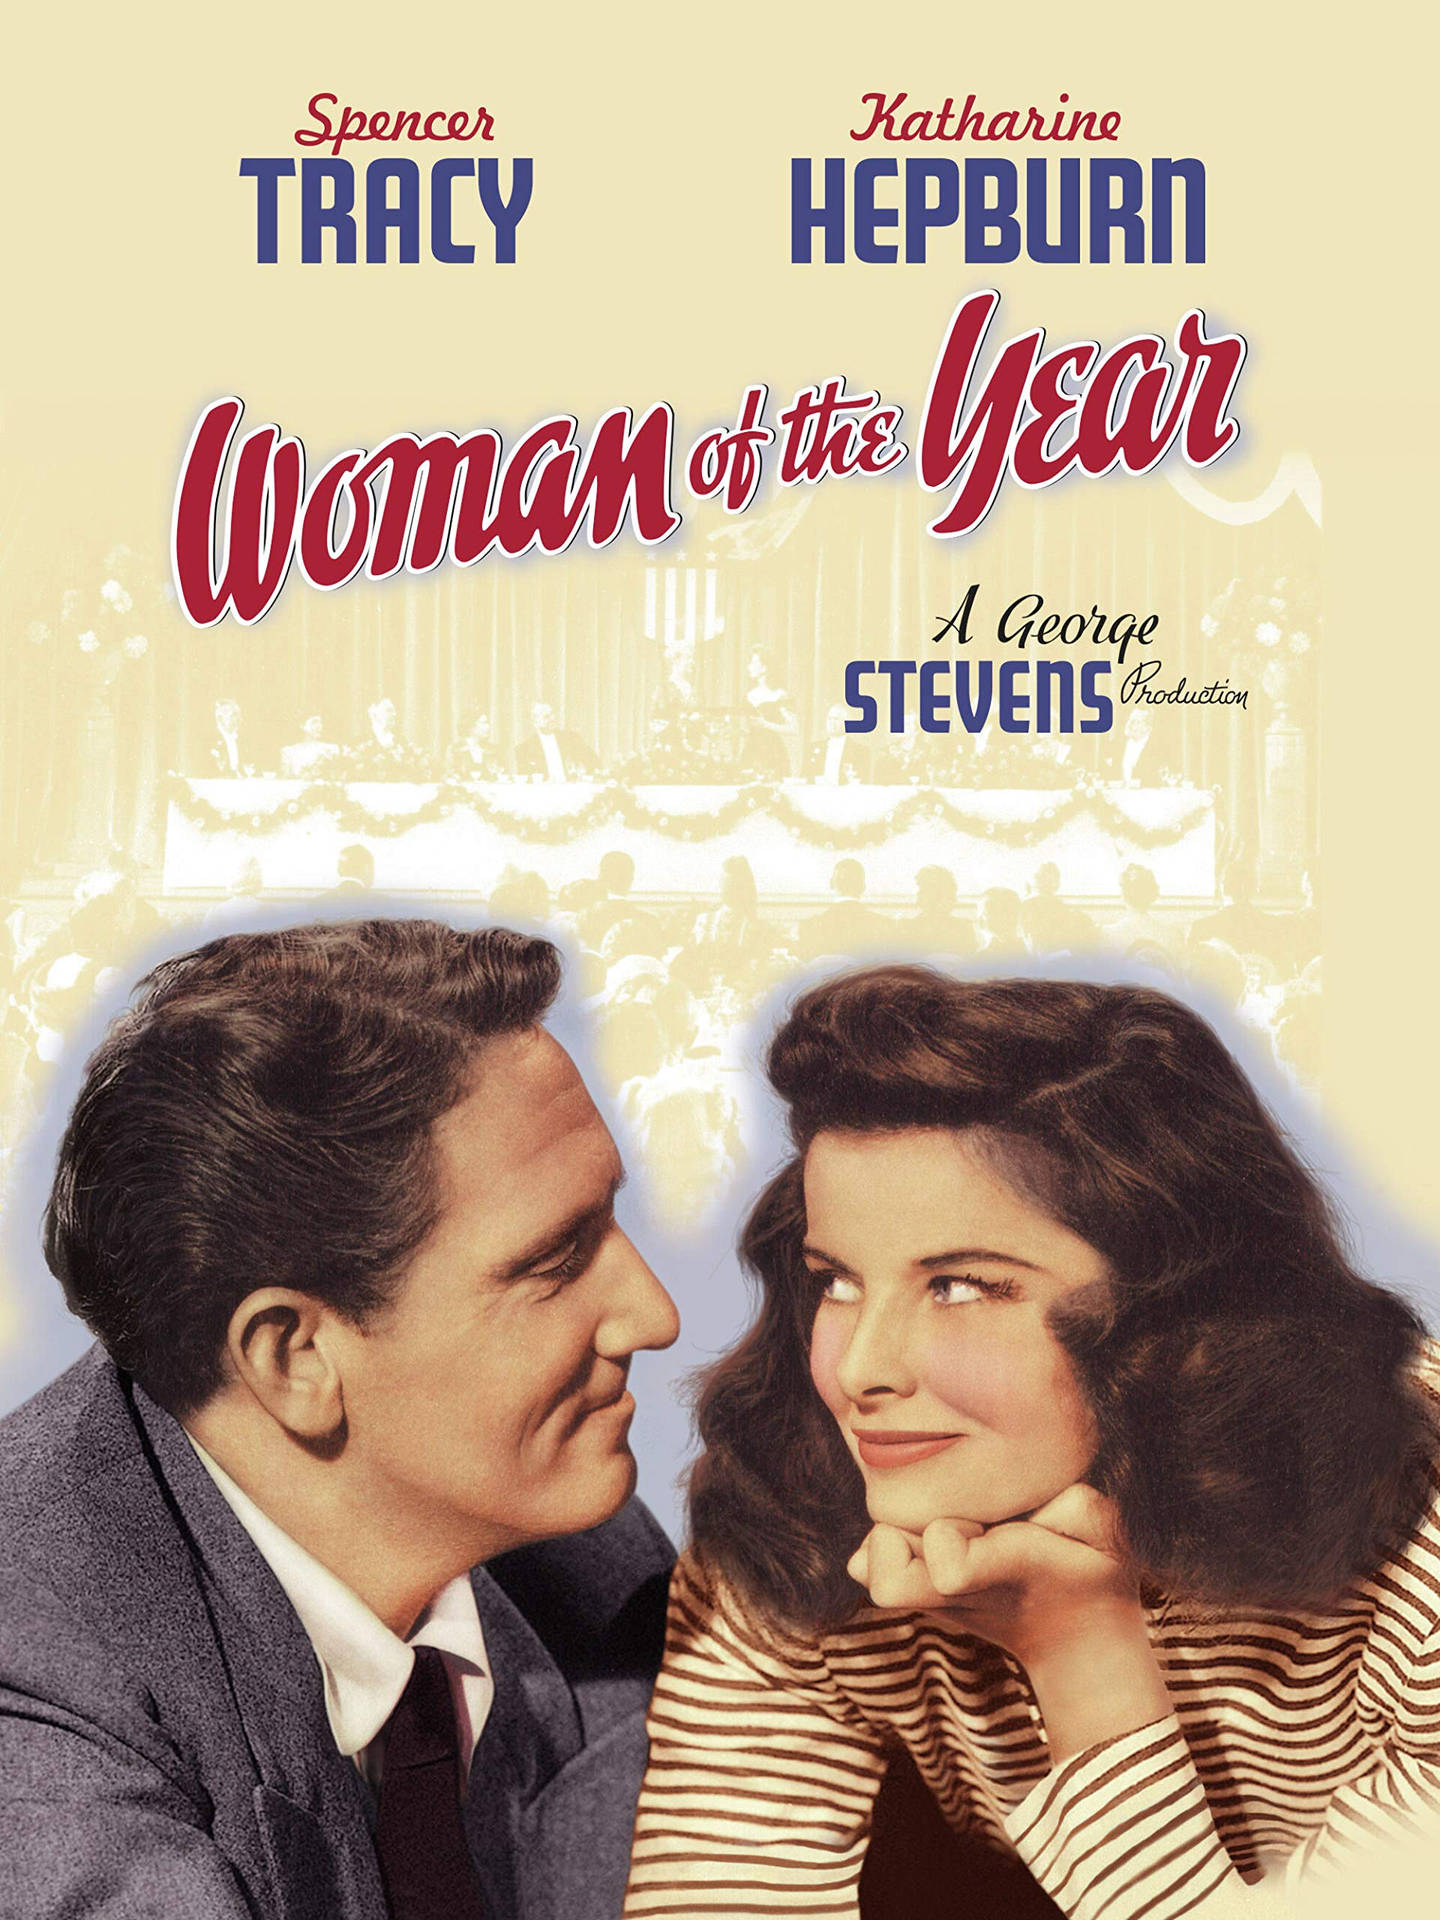 Spencertracy Woman Of The Year Filmaffisch. Wallpaper